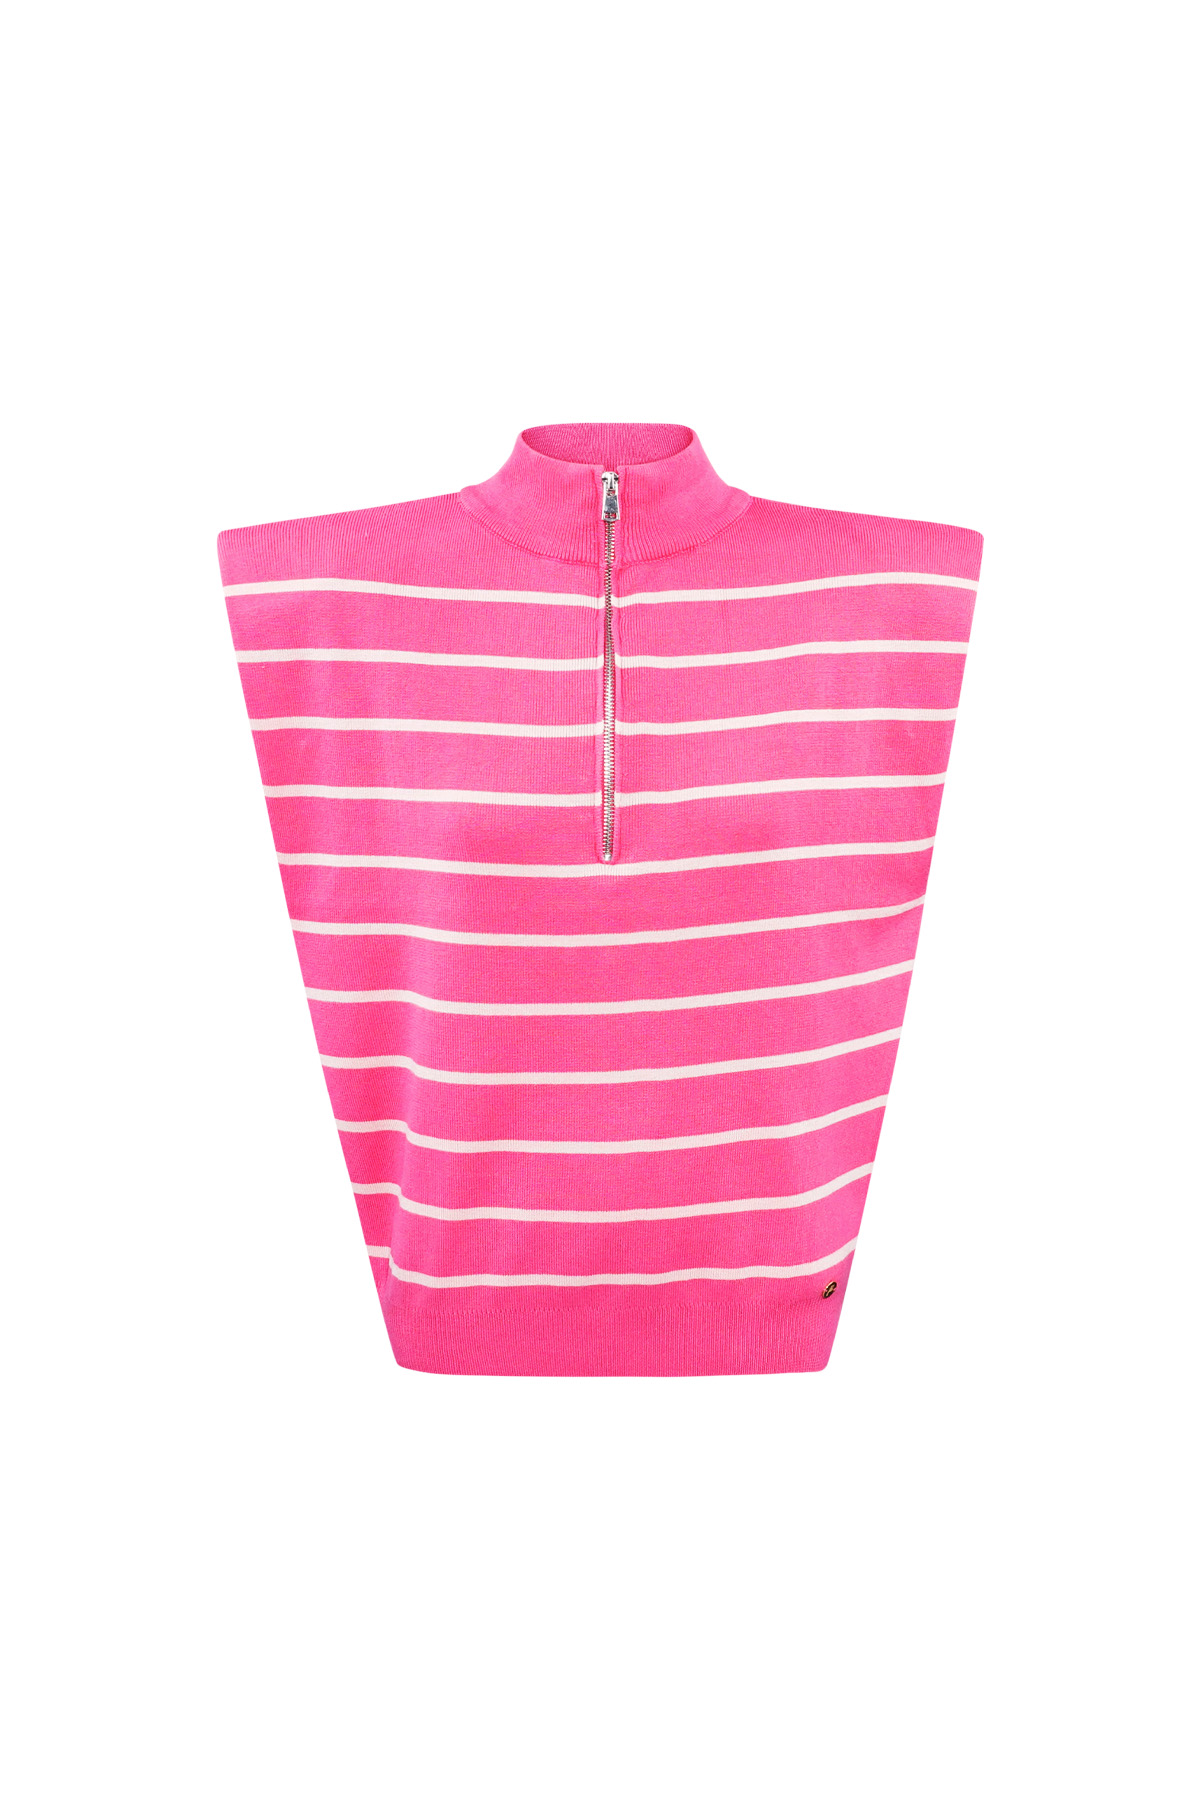 Striped spencer with zipper - pink